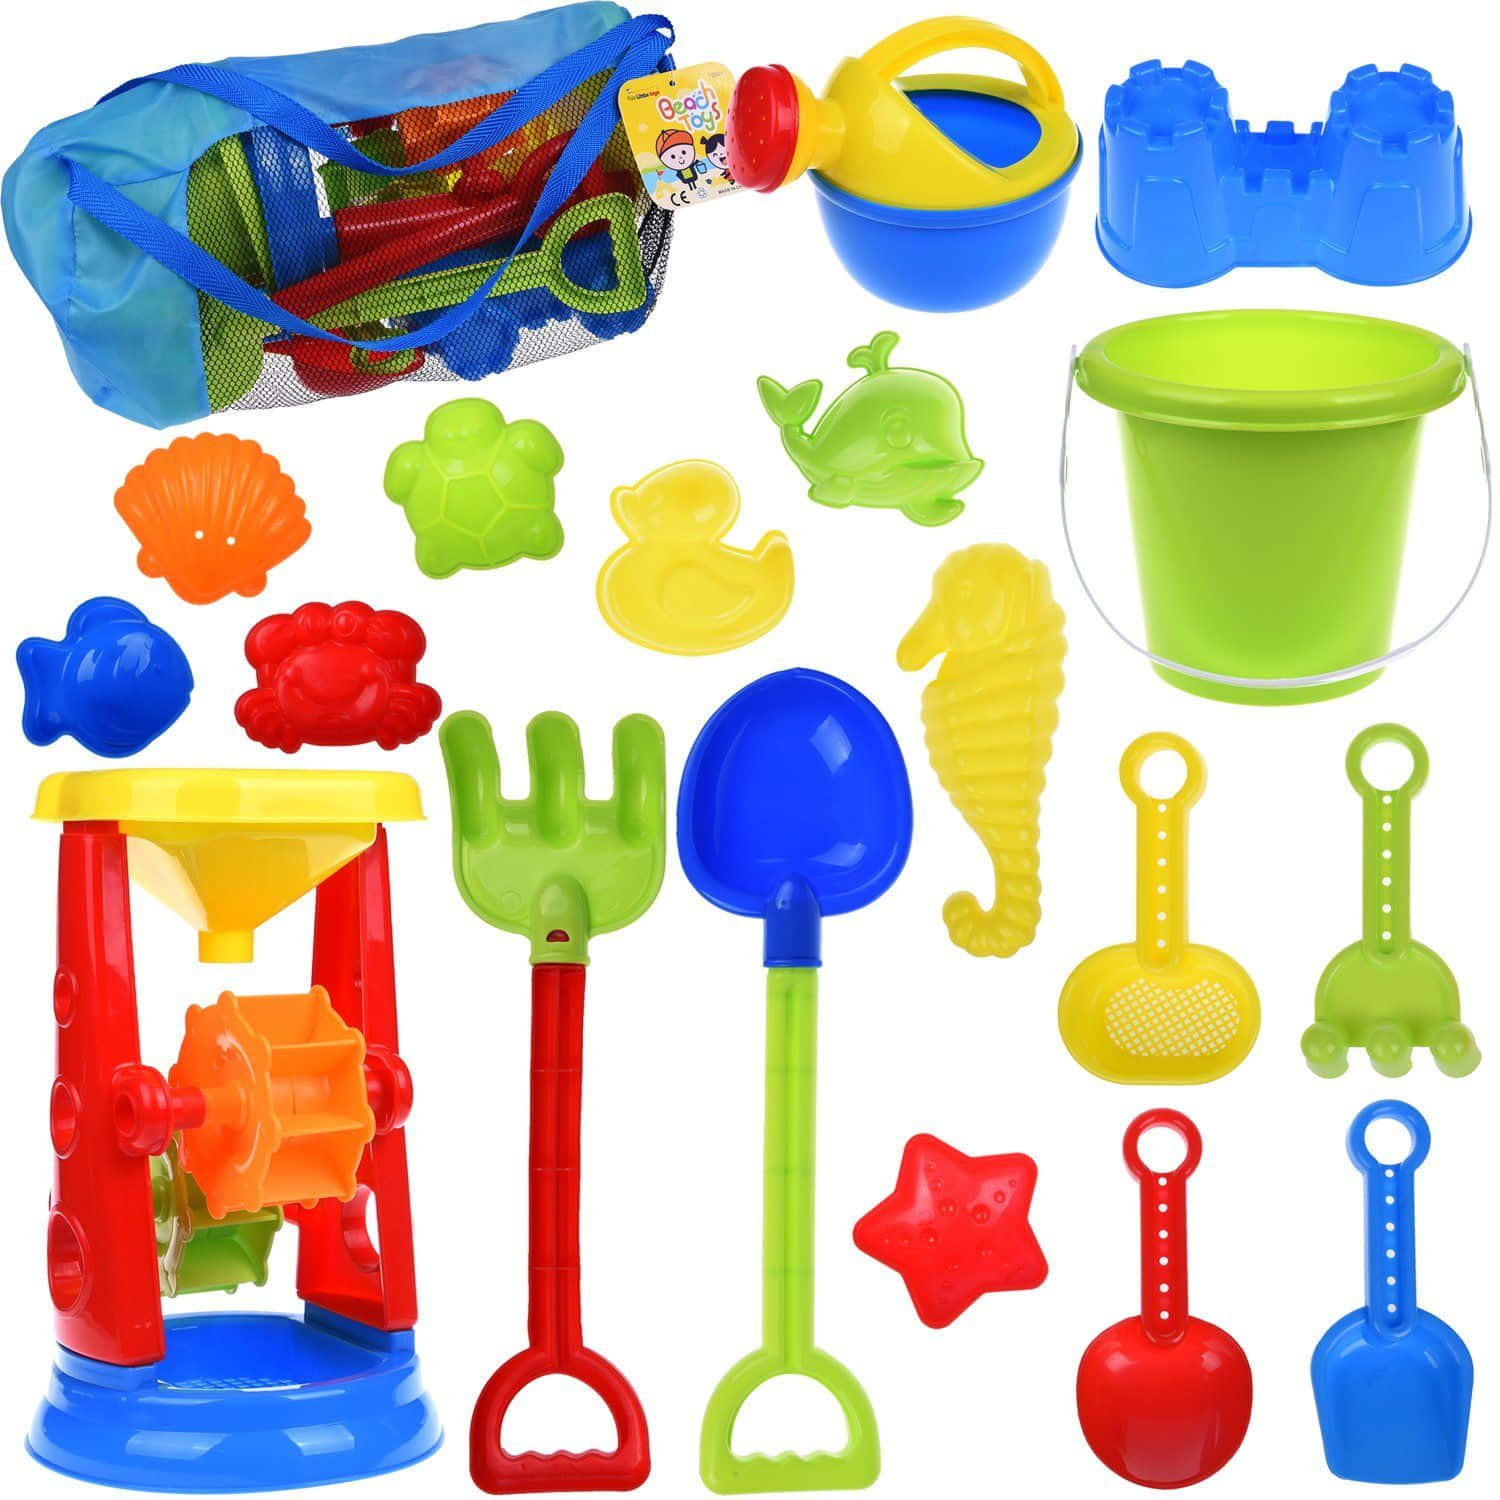 Colorful Beach Toys on Sand Wallpaper